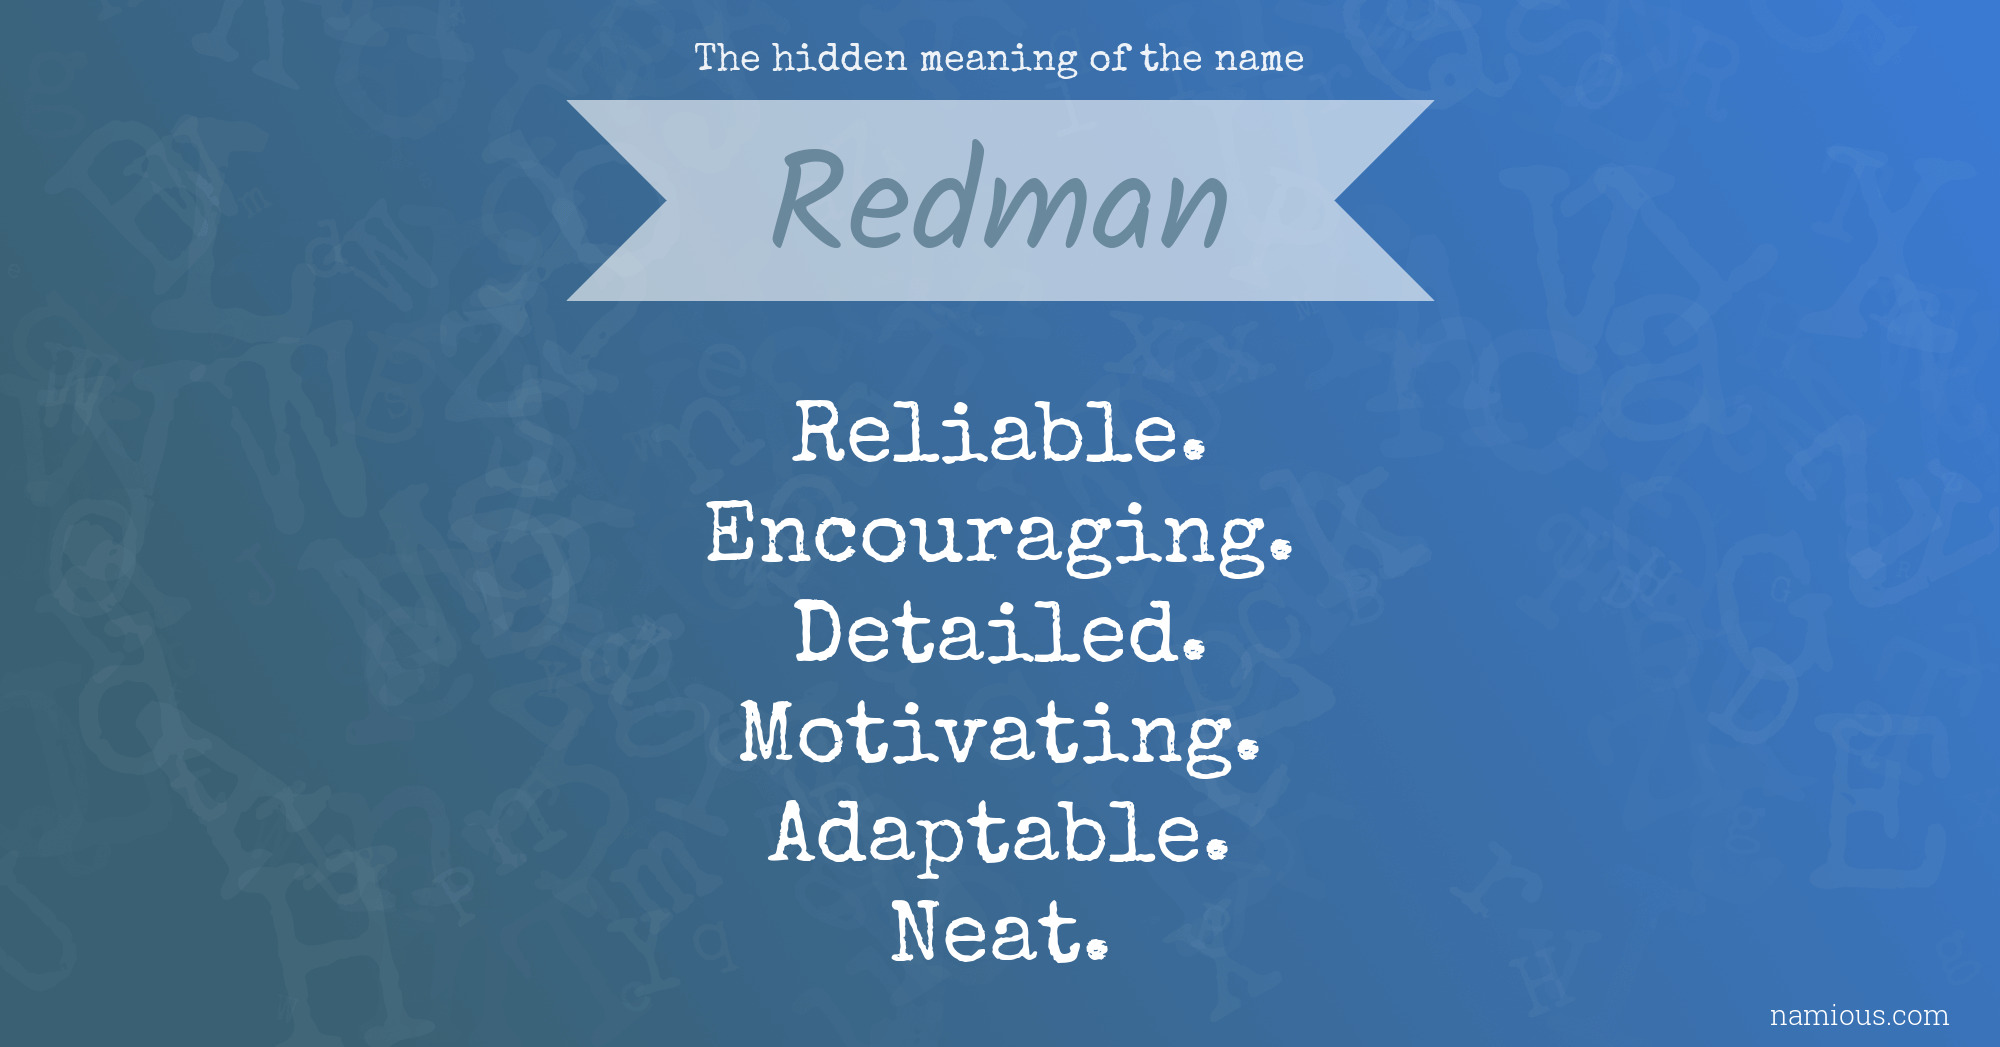 The hidden meaning of the name Redman